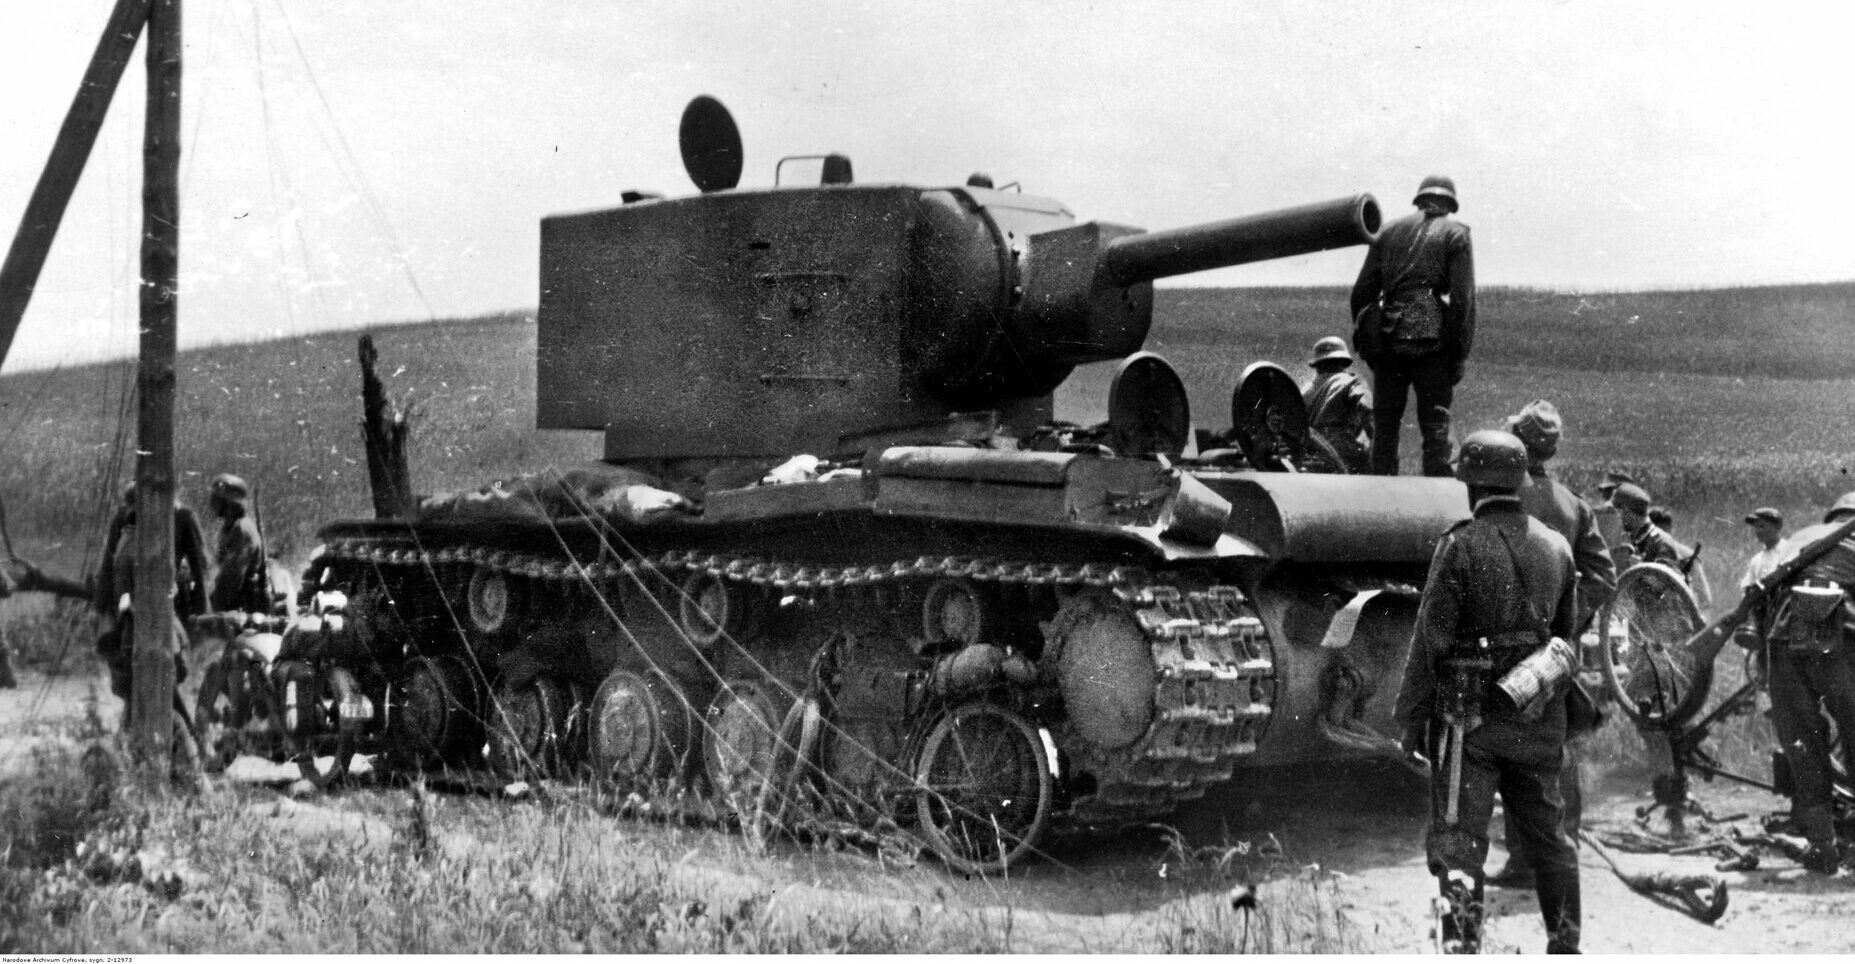 During a lull in the fighting on the Eastern Front, German soldiers take a moment to inspect a Soviet KV-2 heavy tank, which has been captured in battle. Although they considered their armor to be superior to anything fielded by the Red Army, the Germans were dismayed to encounter the heavy KV series tanks and the outstanding T-34 medium tank on the battlefield in the summer of 1941.